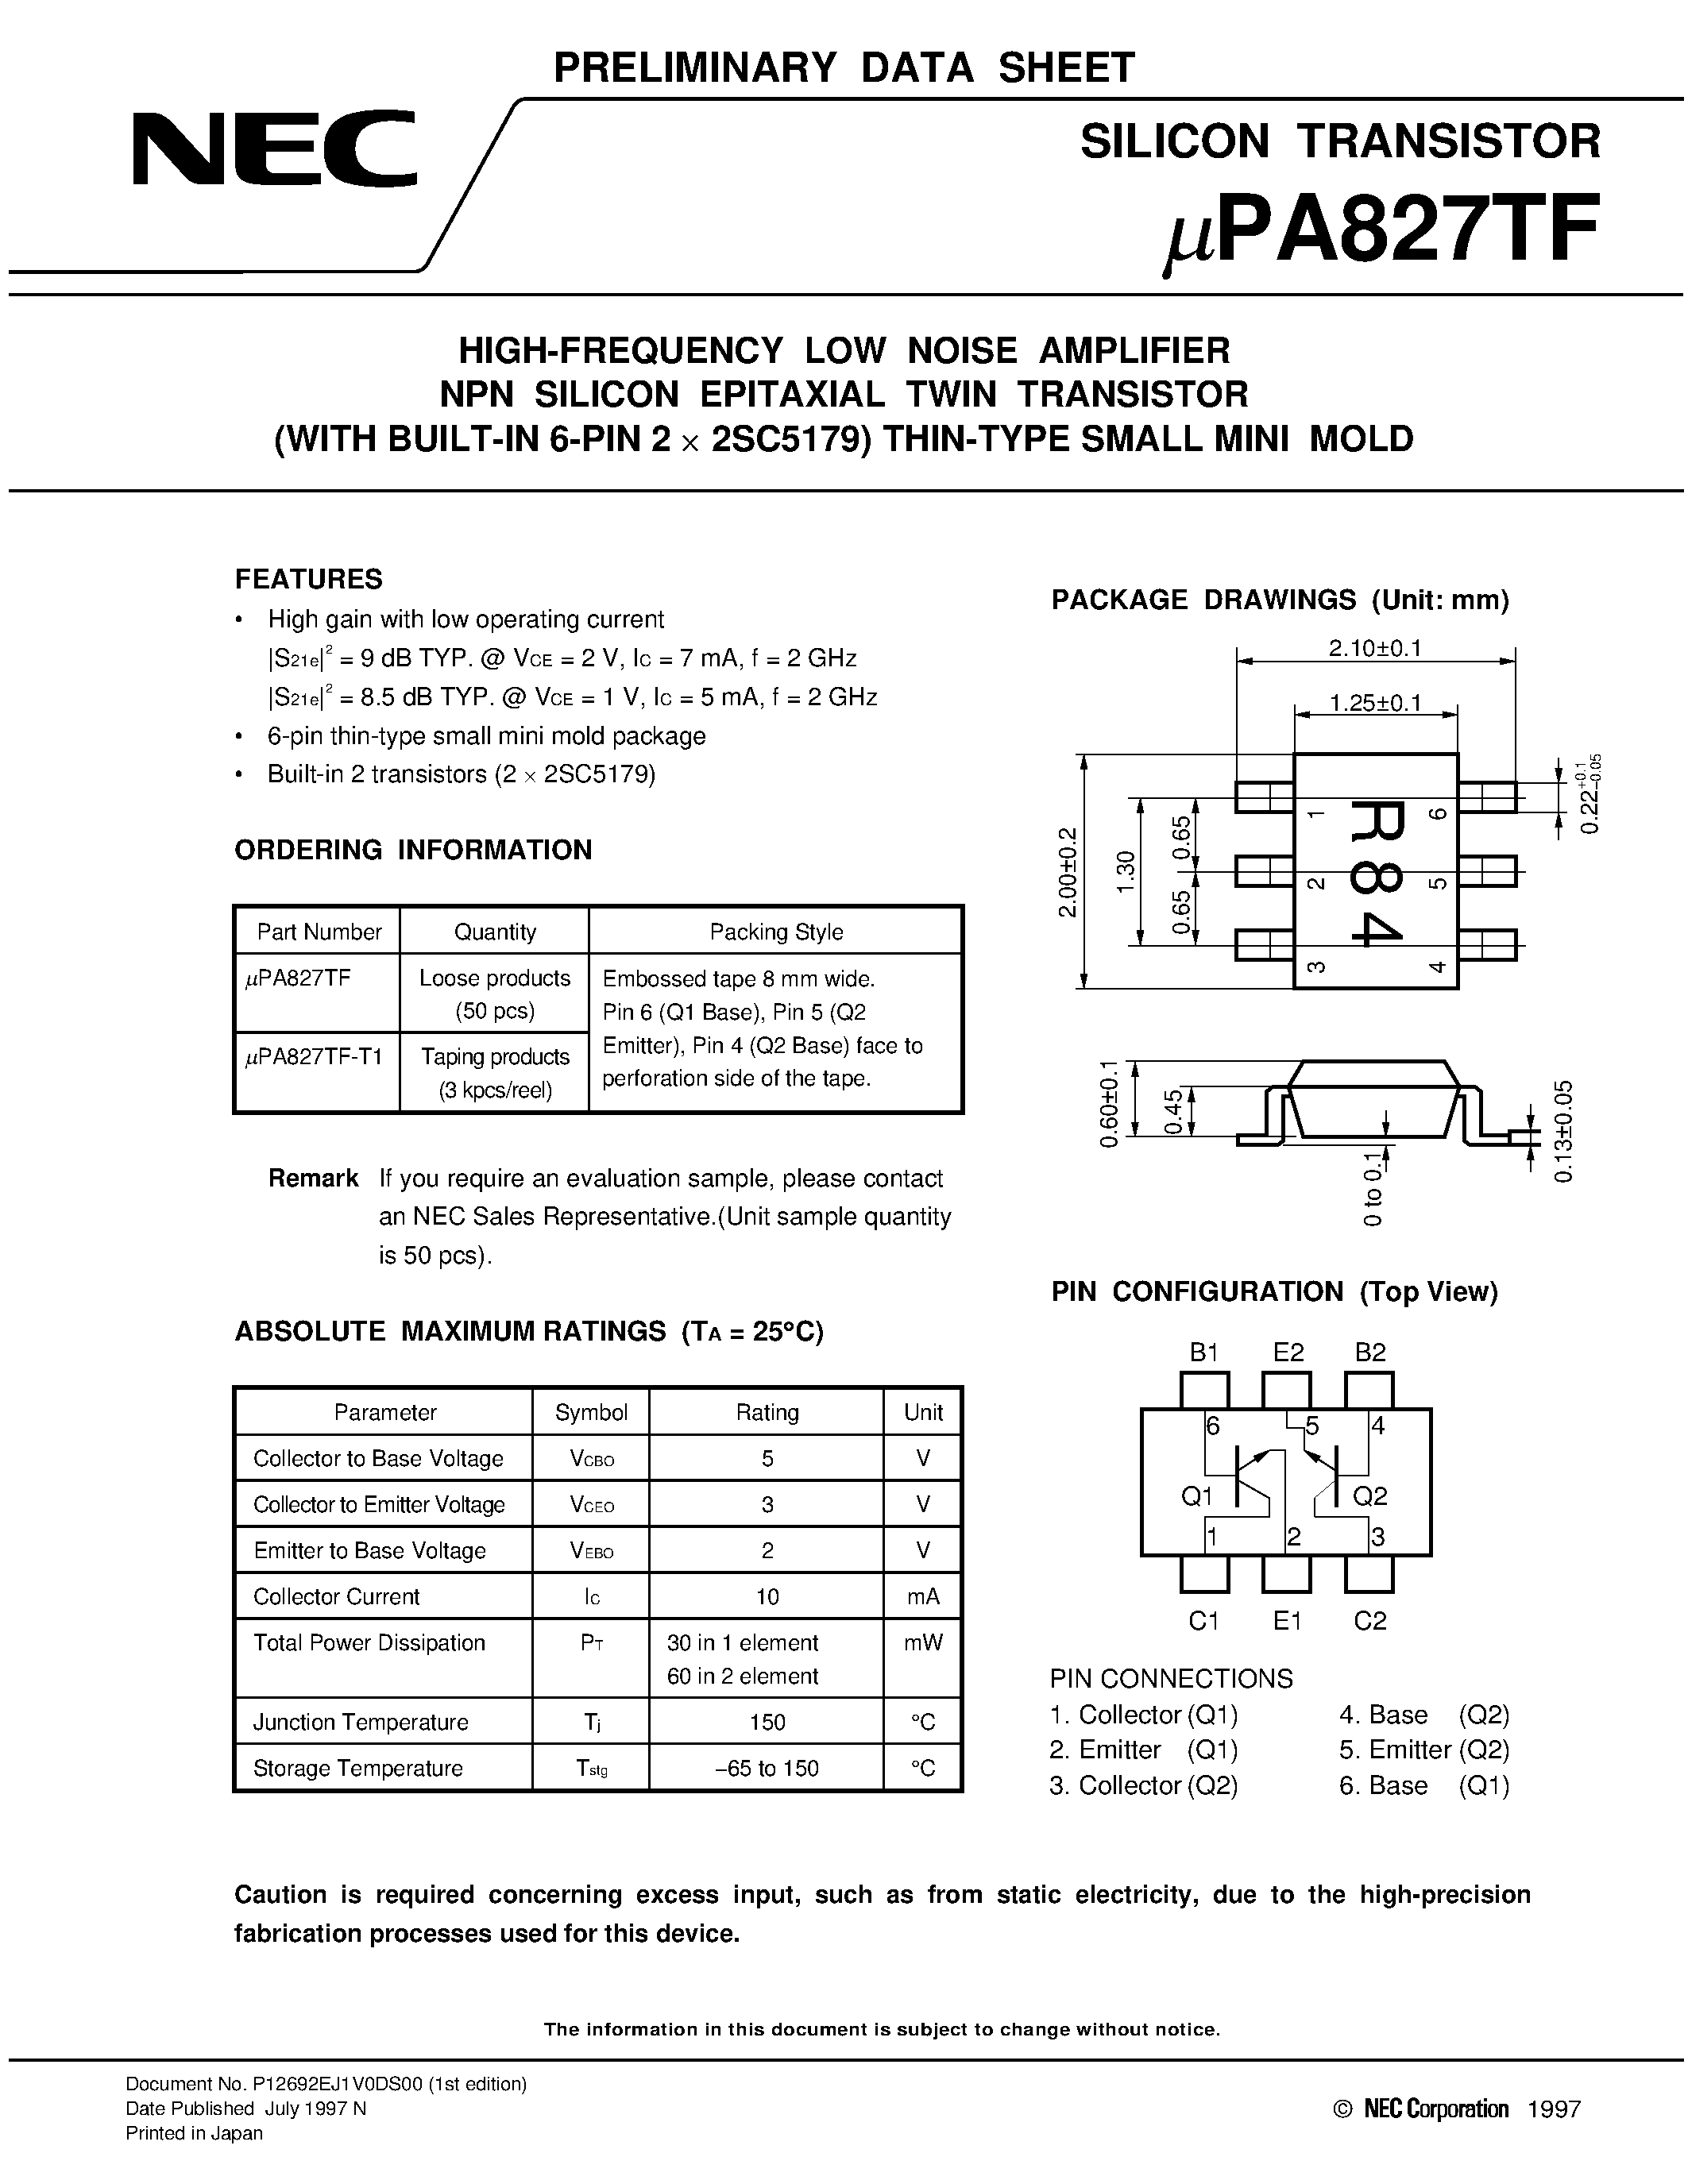 Datasheet UPA827 - HIGH-FREQUENCY LOW NOISE AMPLIFIER NPN SILICON EPITAXIAL TWIN TRANSISTOR WITH BUILT-IN 6-PIN 2 x 2SC5179 THIN-TYPE SMALL MINI MOLD page 1